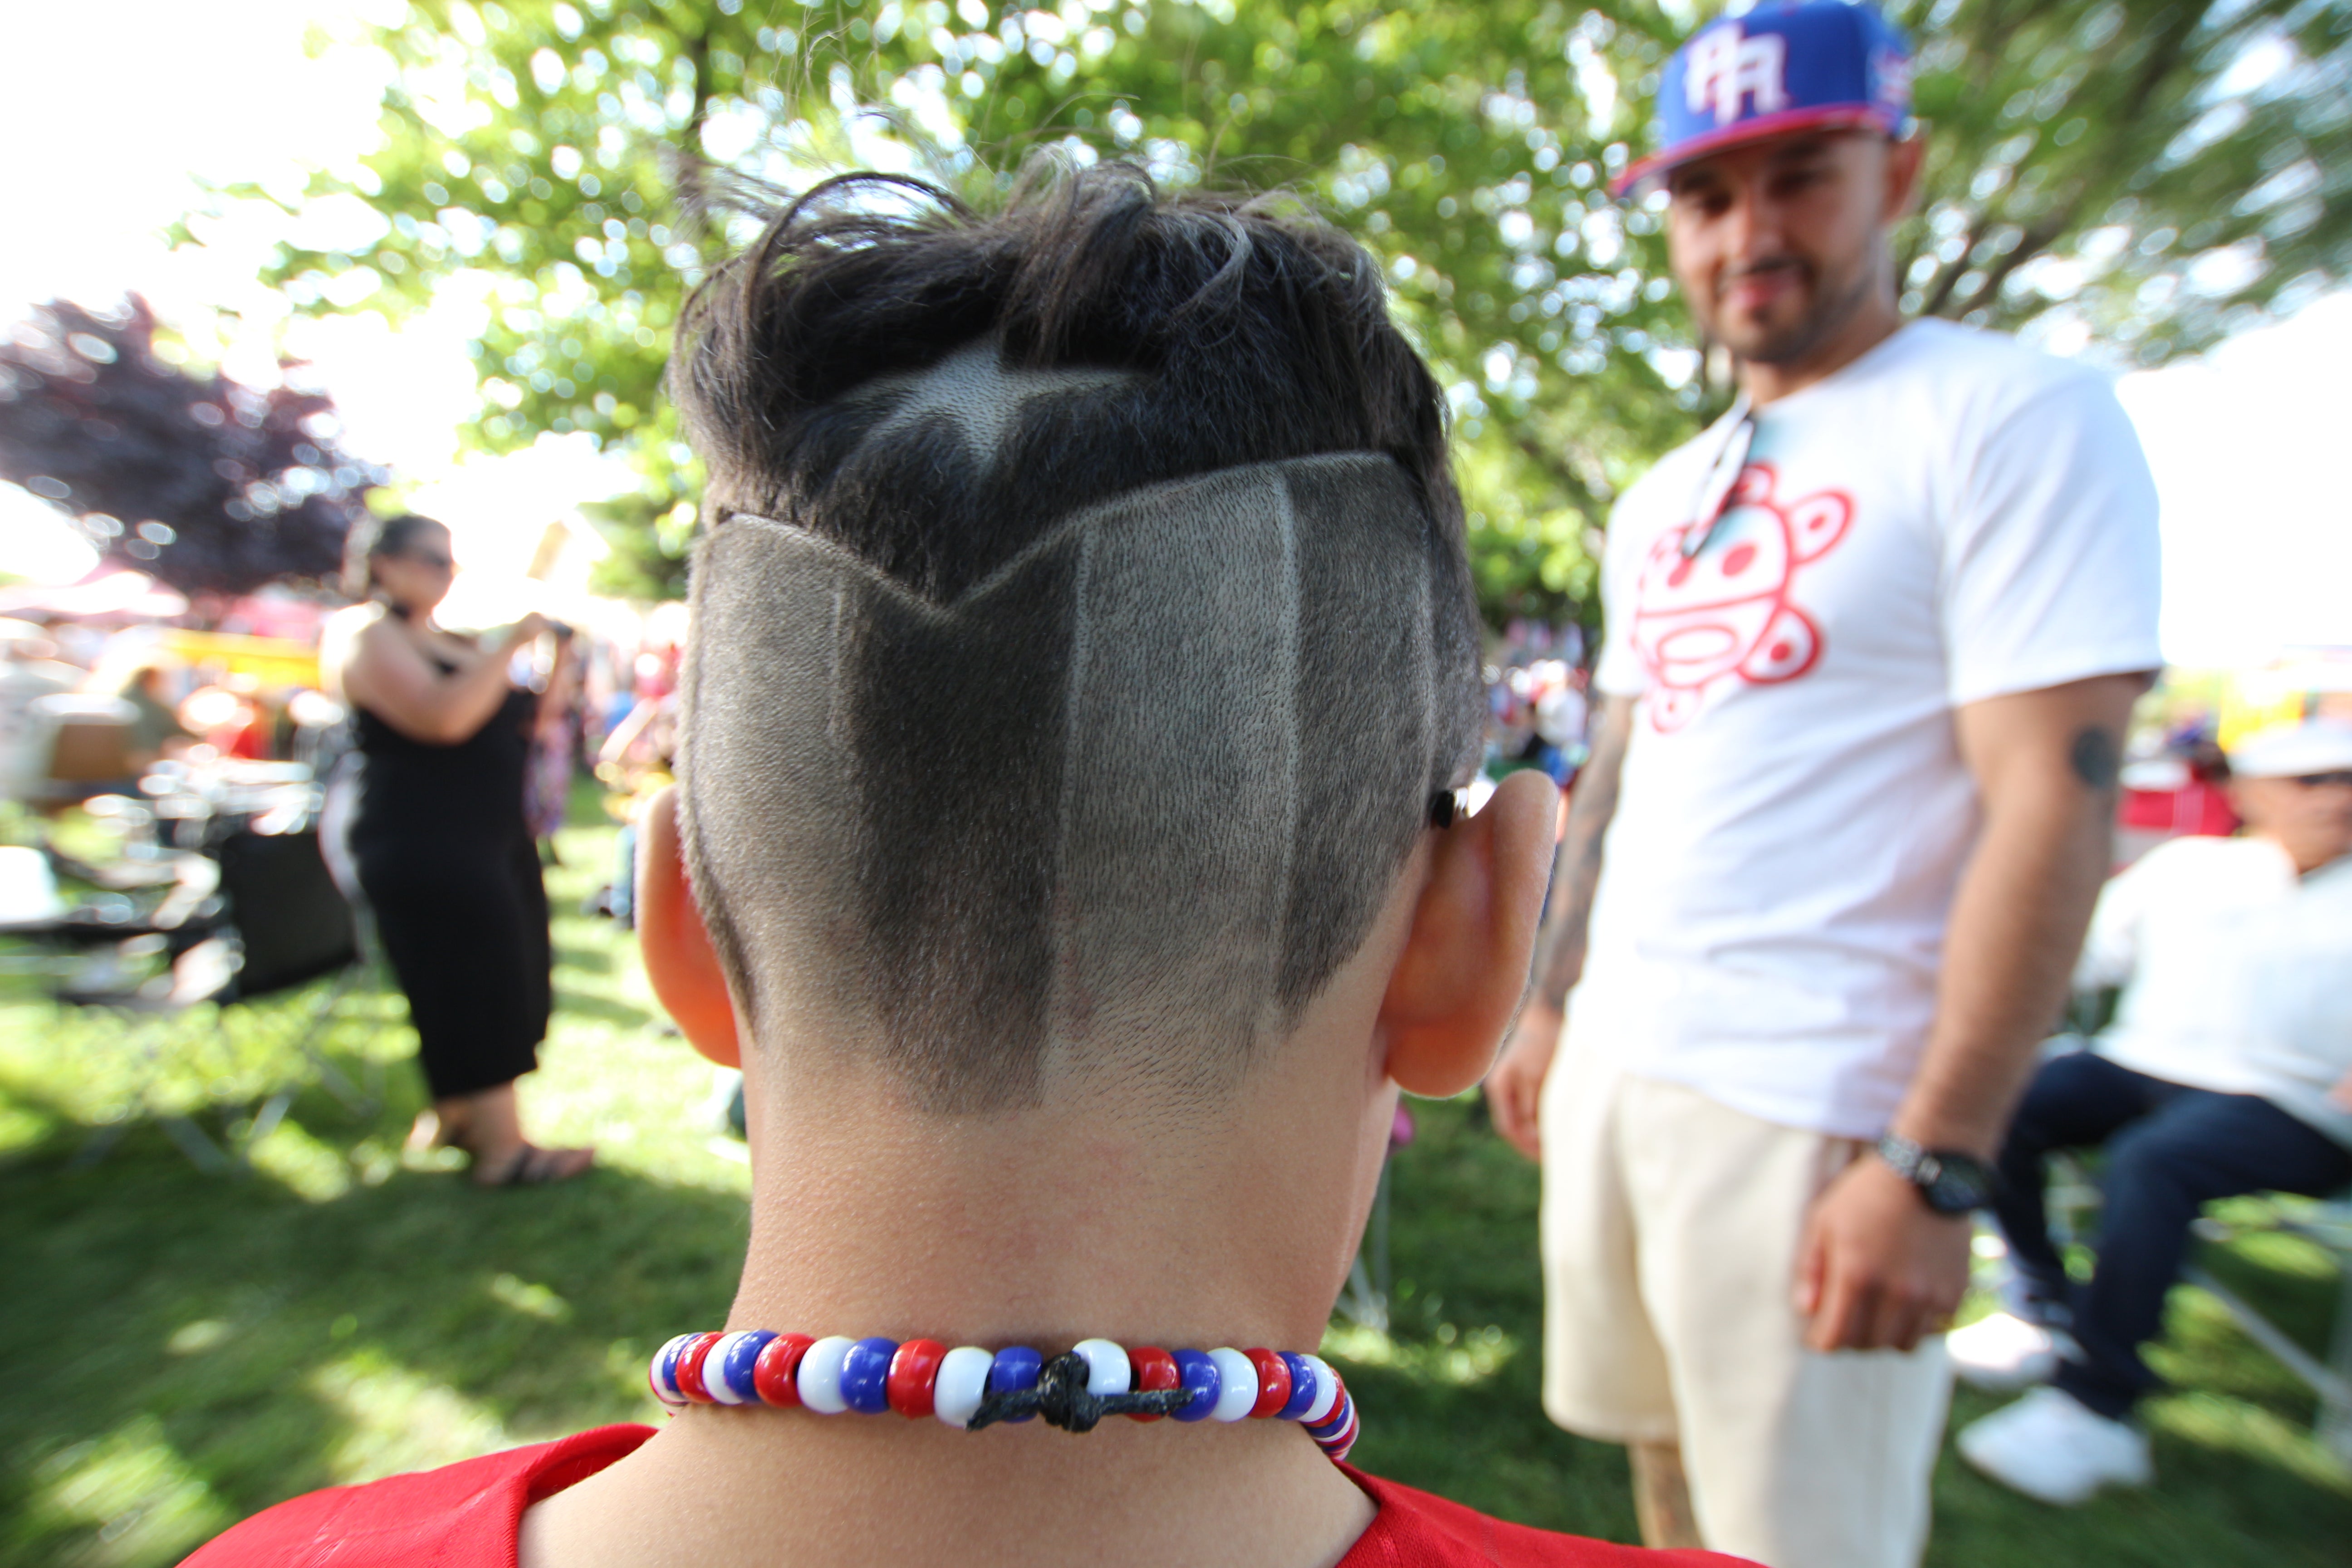 Puerto Rican flag buzzed into the hair of a young boy